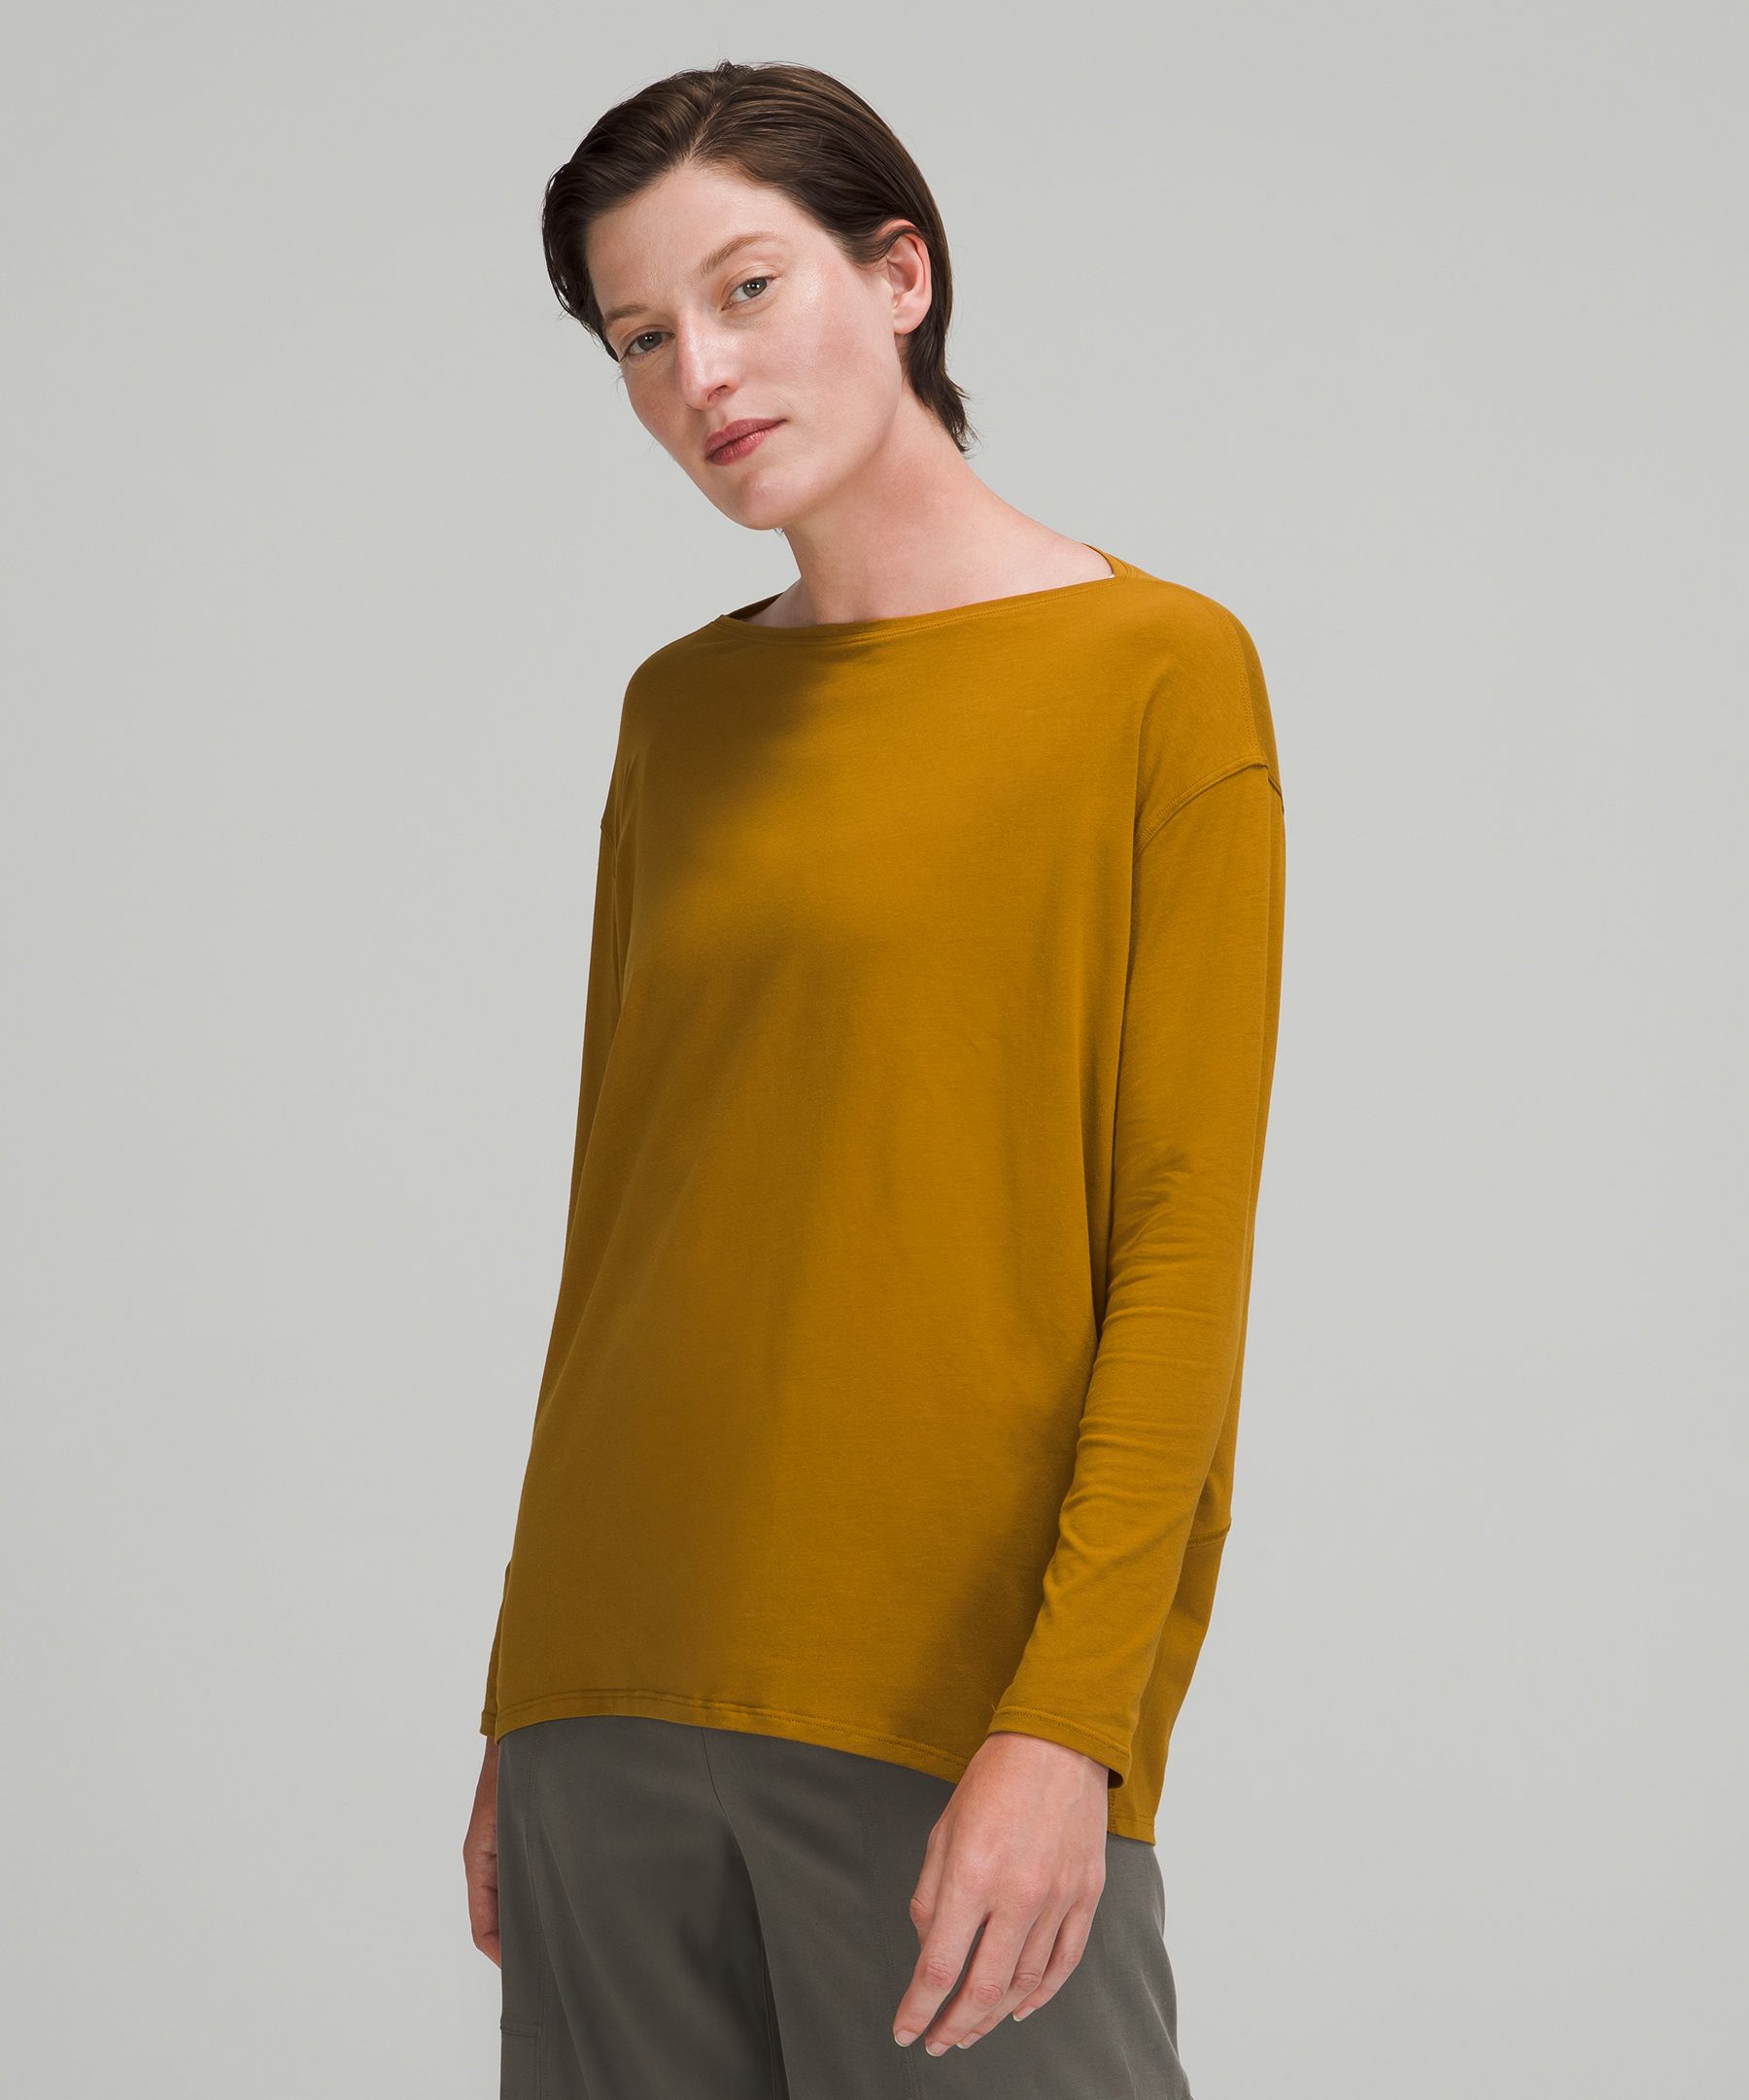 Lululemon Back In Action Long Sleeve Shirt In Yellow